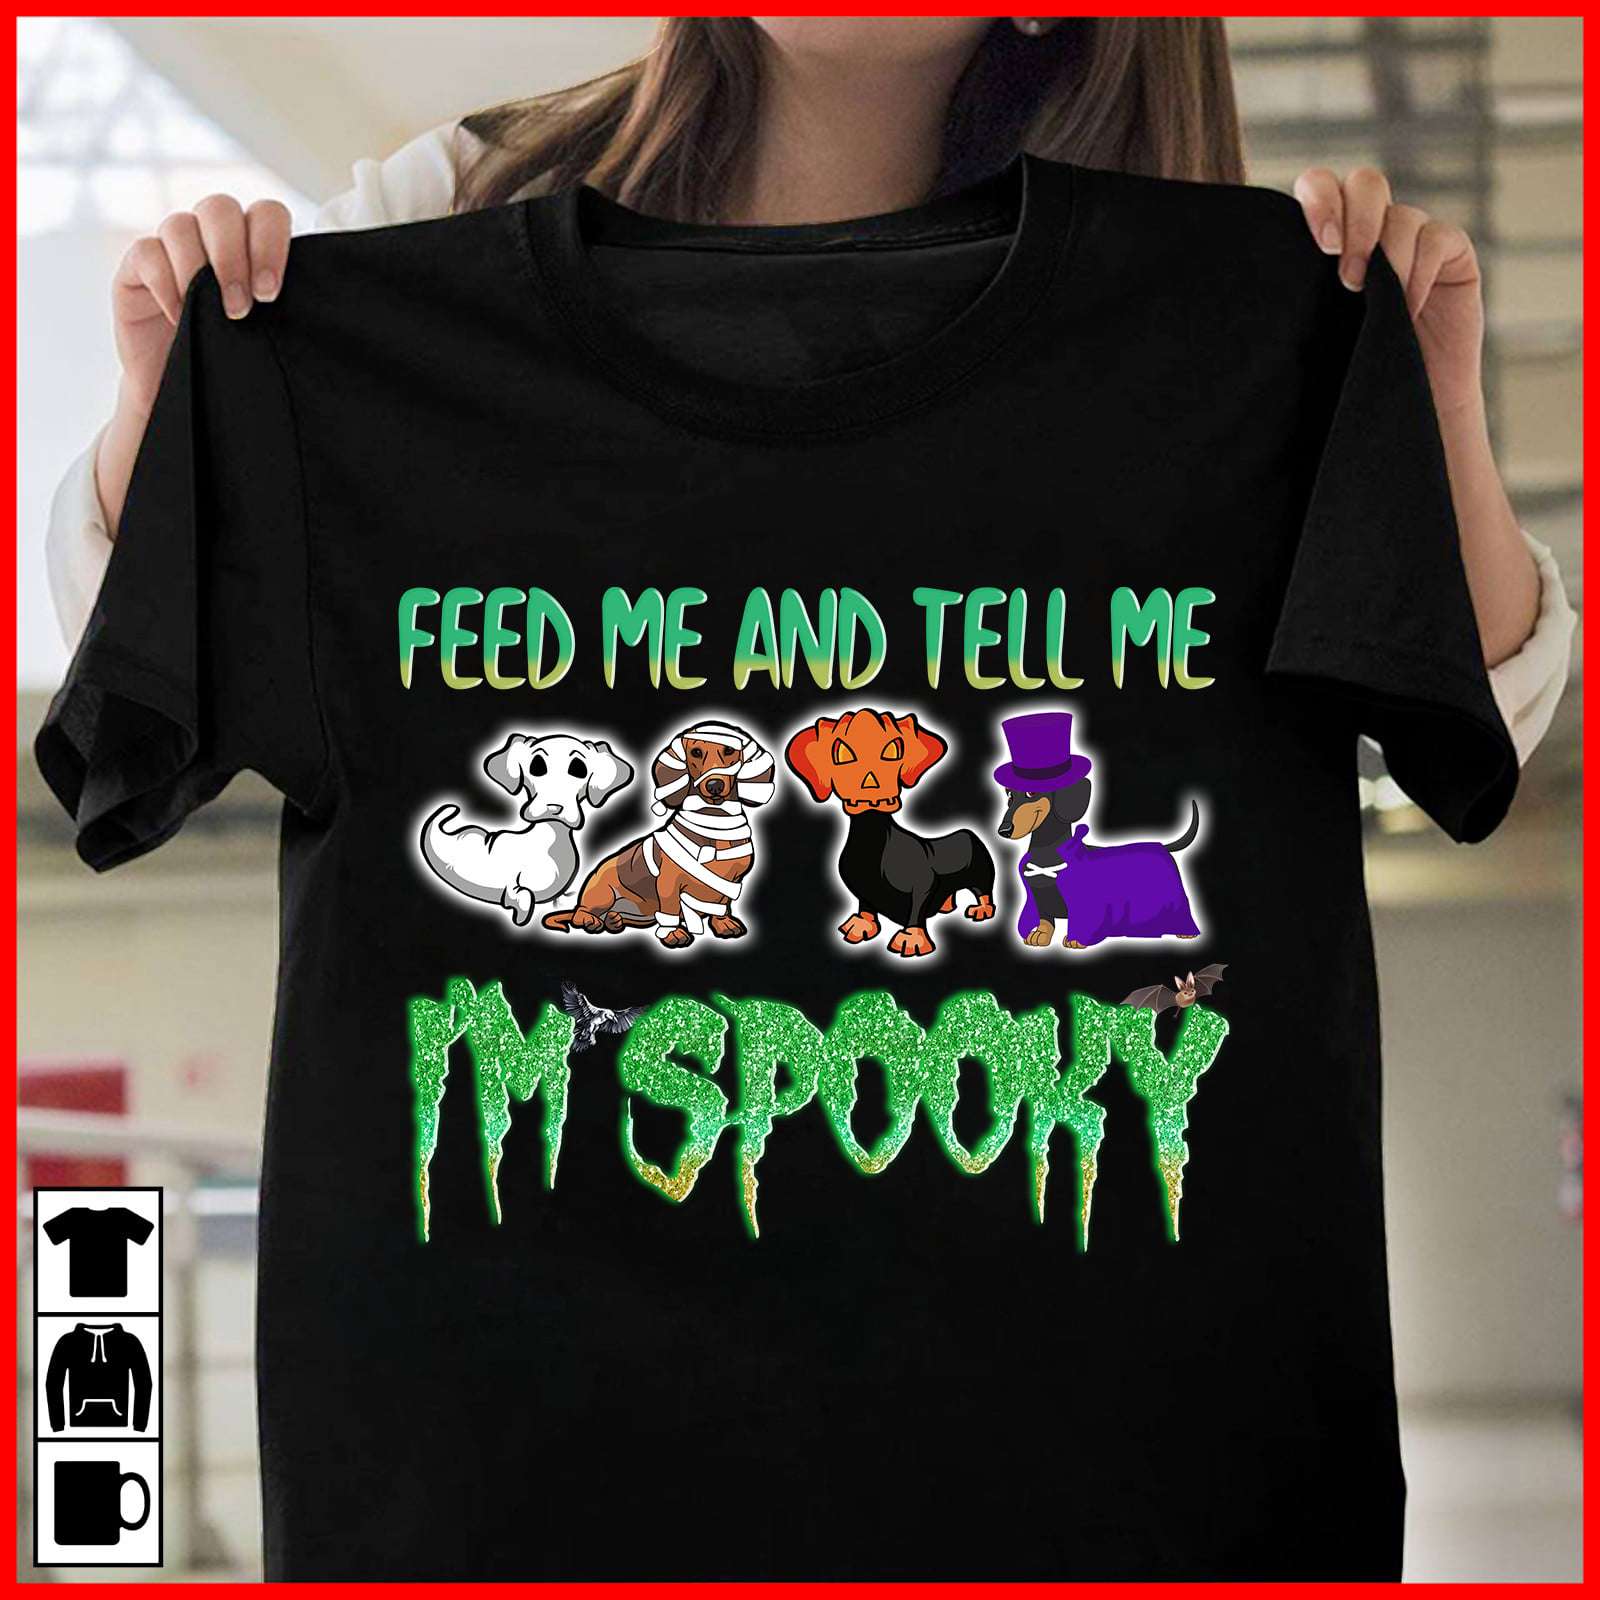 Feed me and tell me I'm spooky - Halloween spooky vibes, Dachshund dog costume